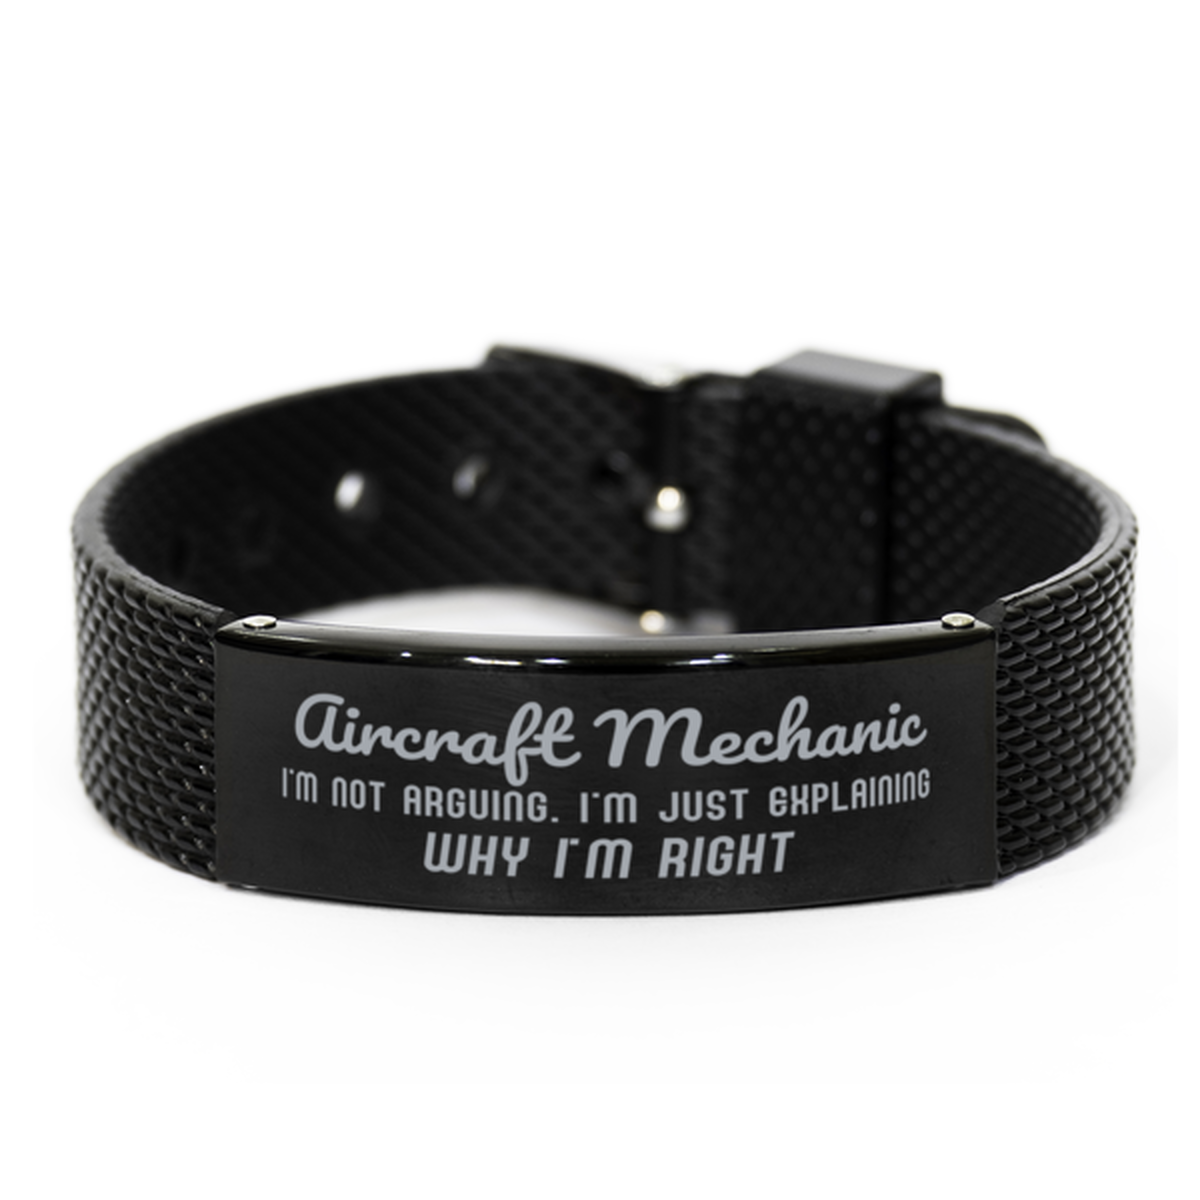 Aircraft Mechanic I'm not Arguing. I'm Just Explaining Why I'm RIGHT Black Shark Mesh Bracelet, Funny Saying Quote Aircraft Mechanic Gifts For Aircraft Mechanic Graduation Birthday Christmas Gifts for Men Women Coworker